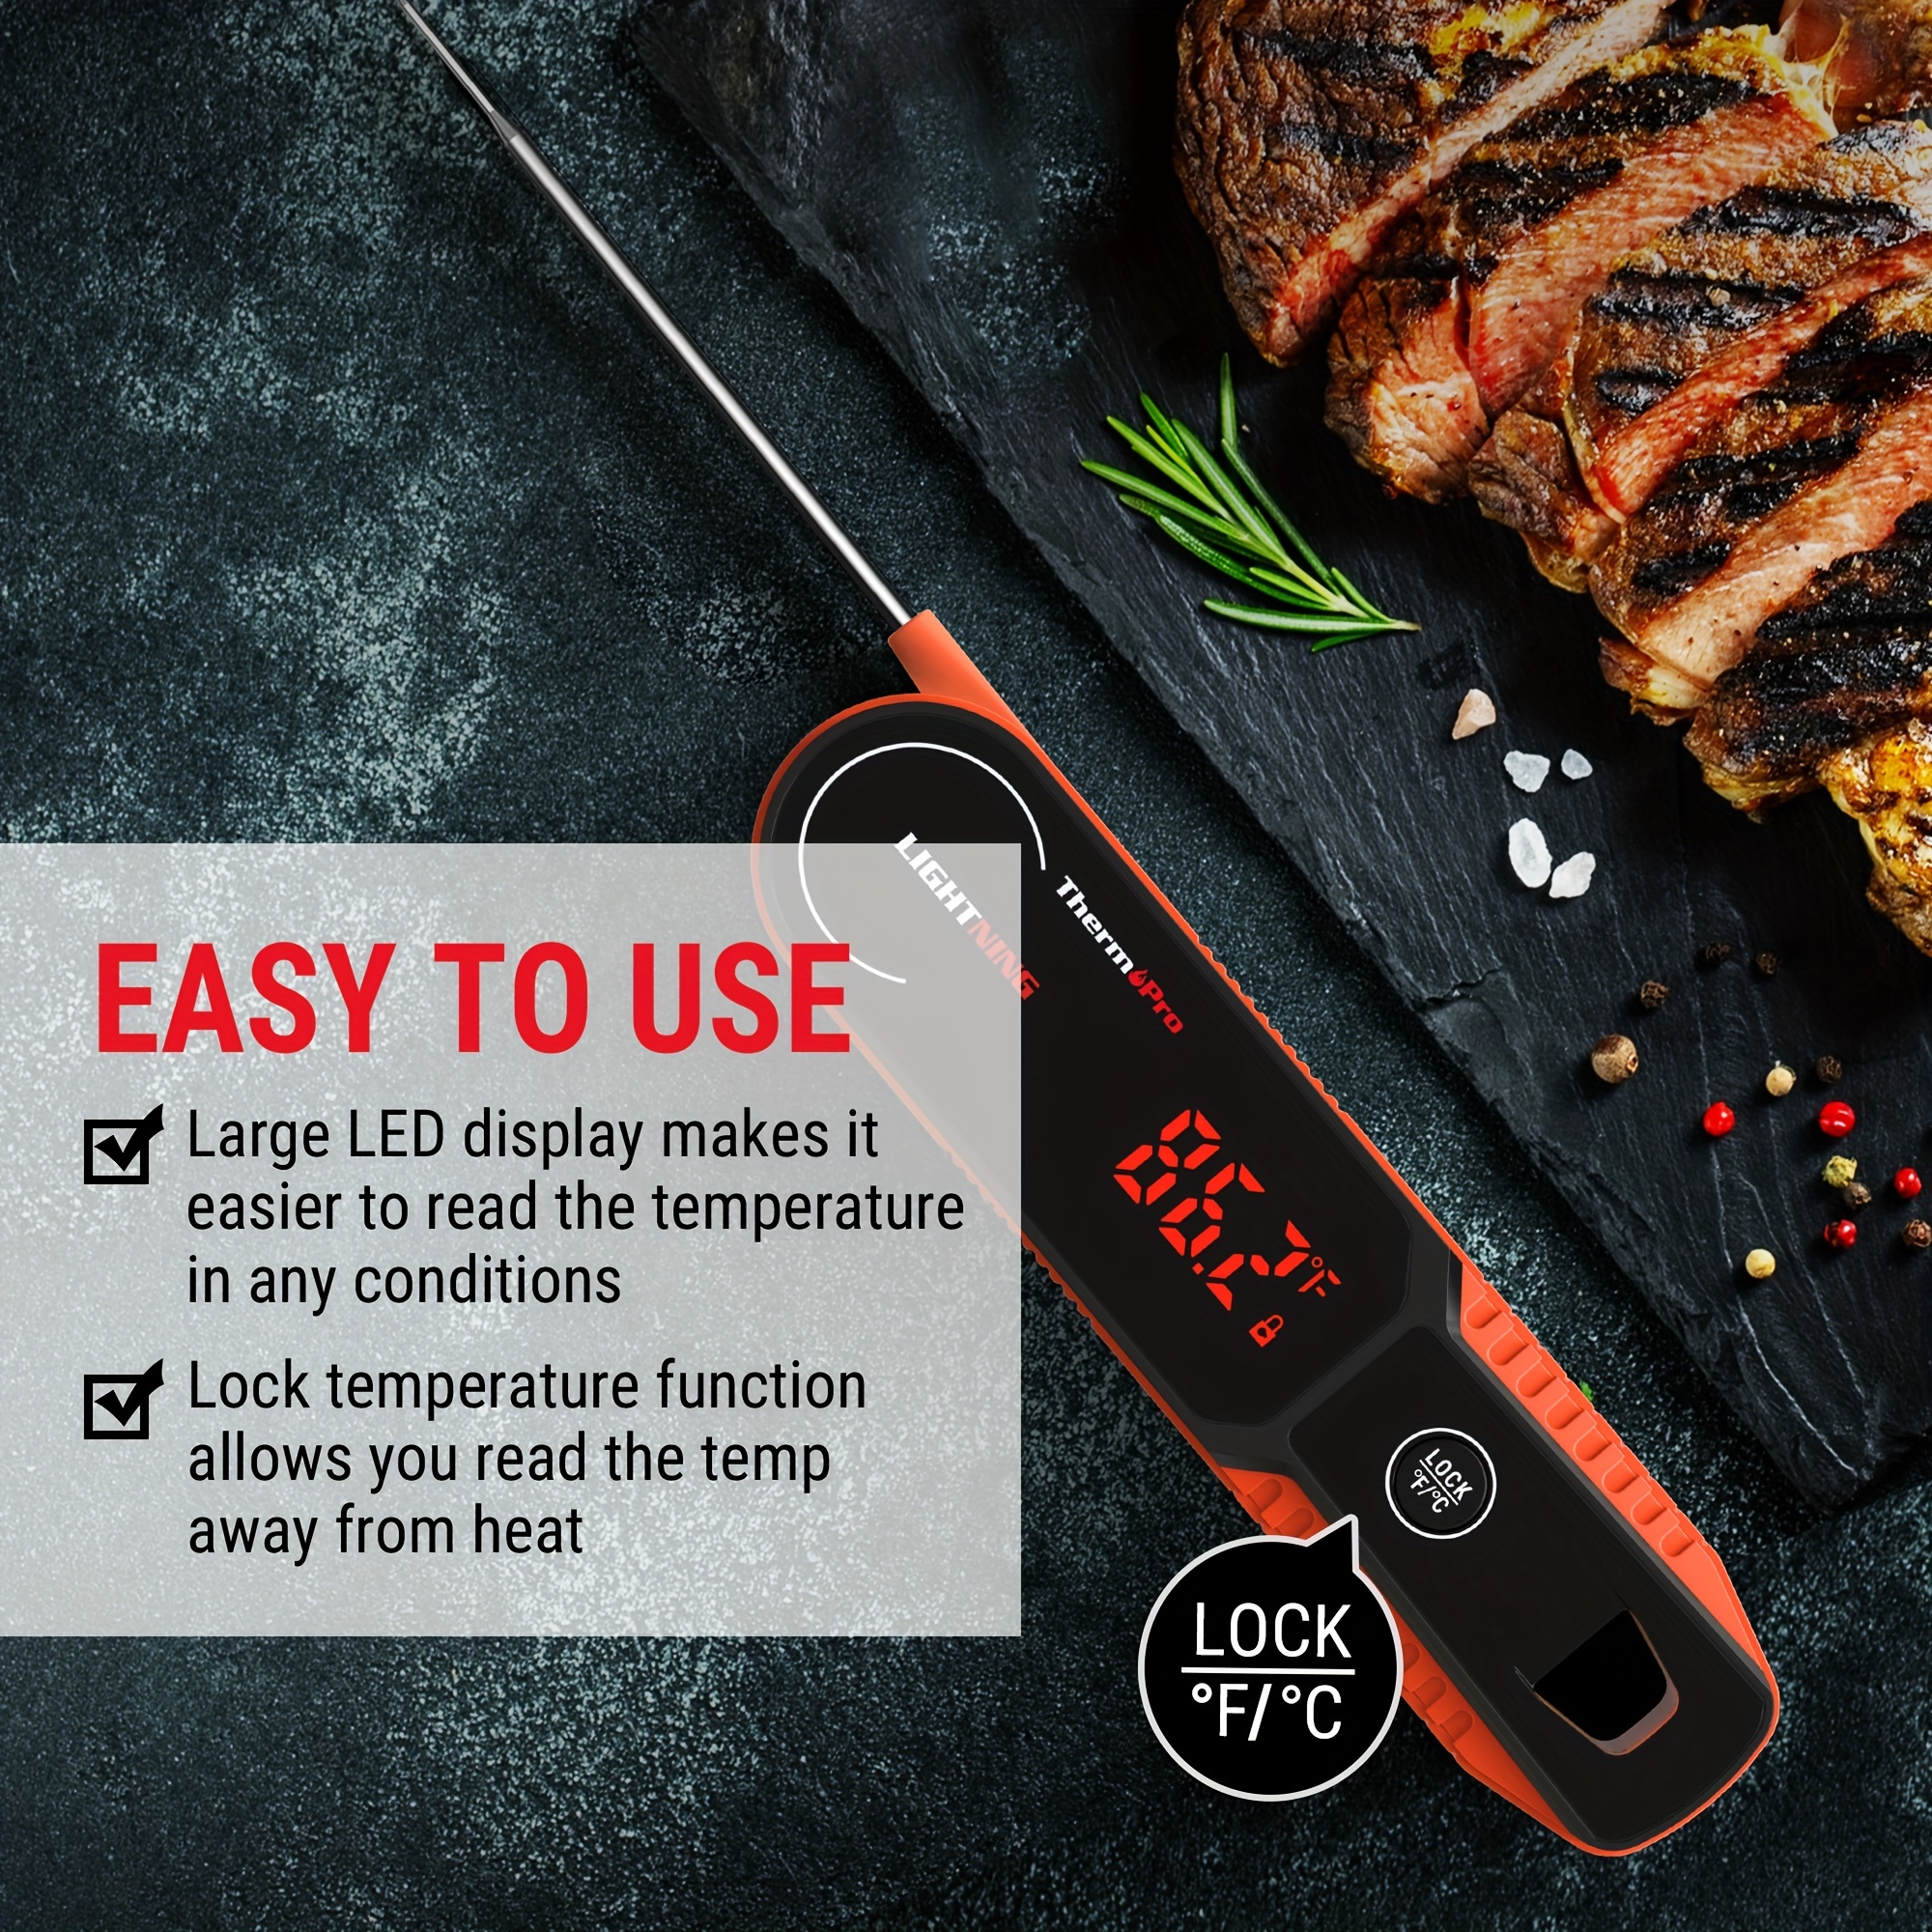 ThermoPro Lightning One Second Instant Meat Thermometer REVIEW 